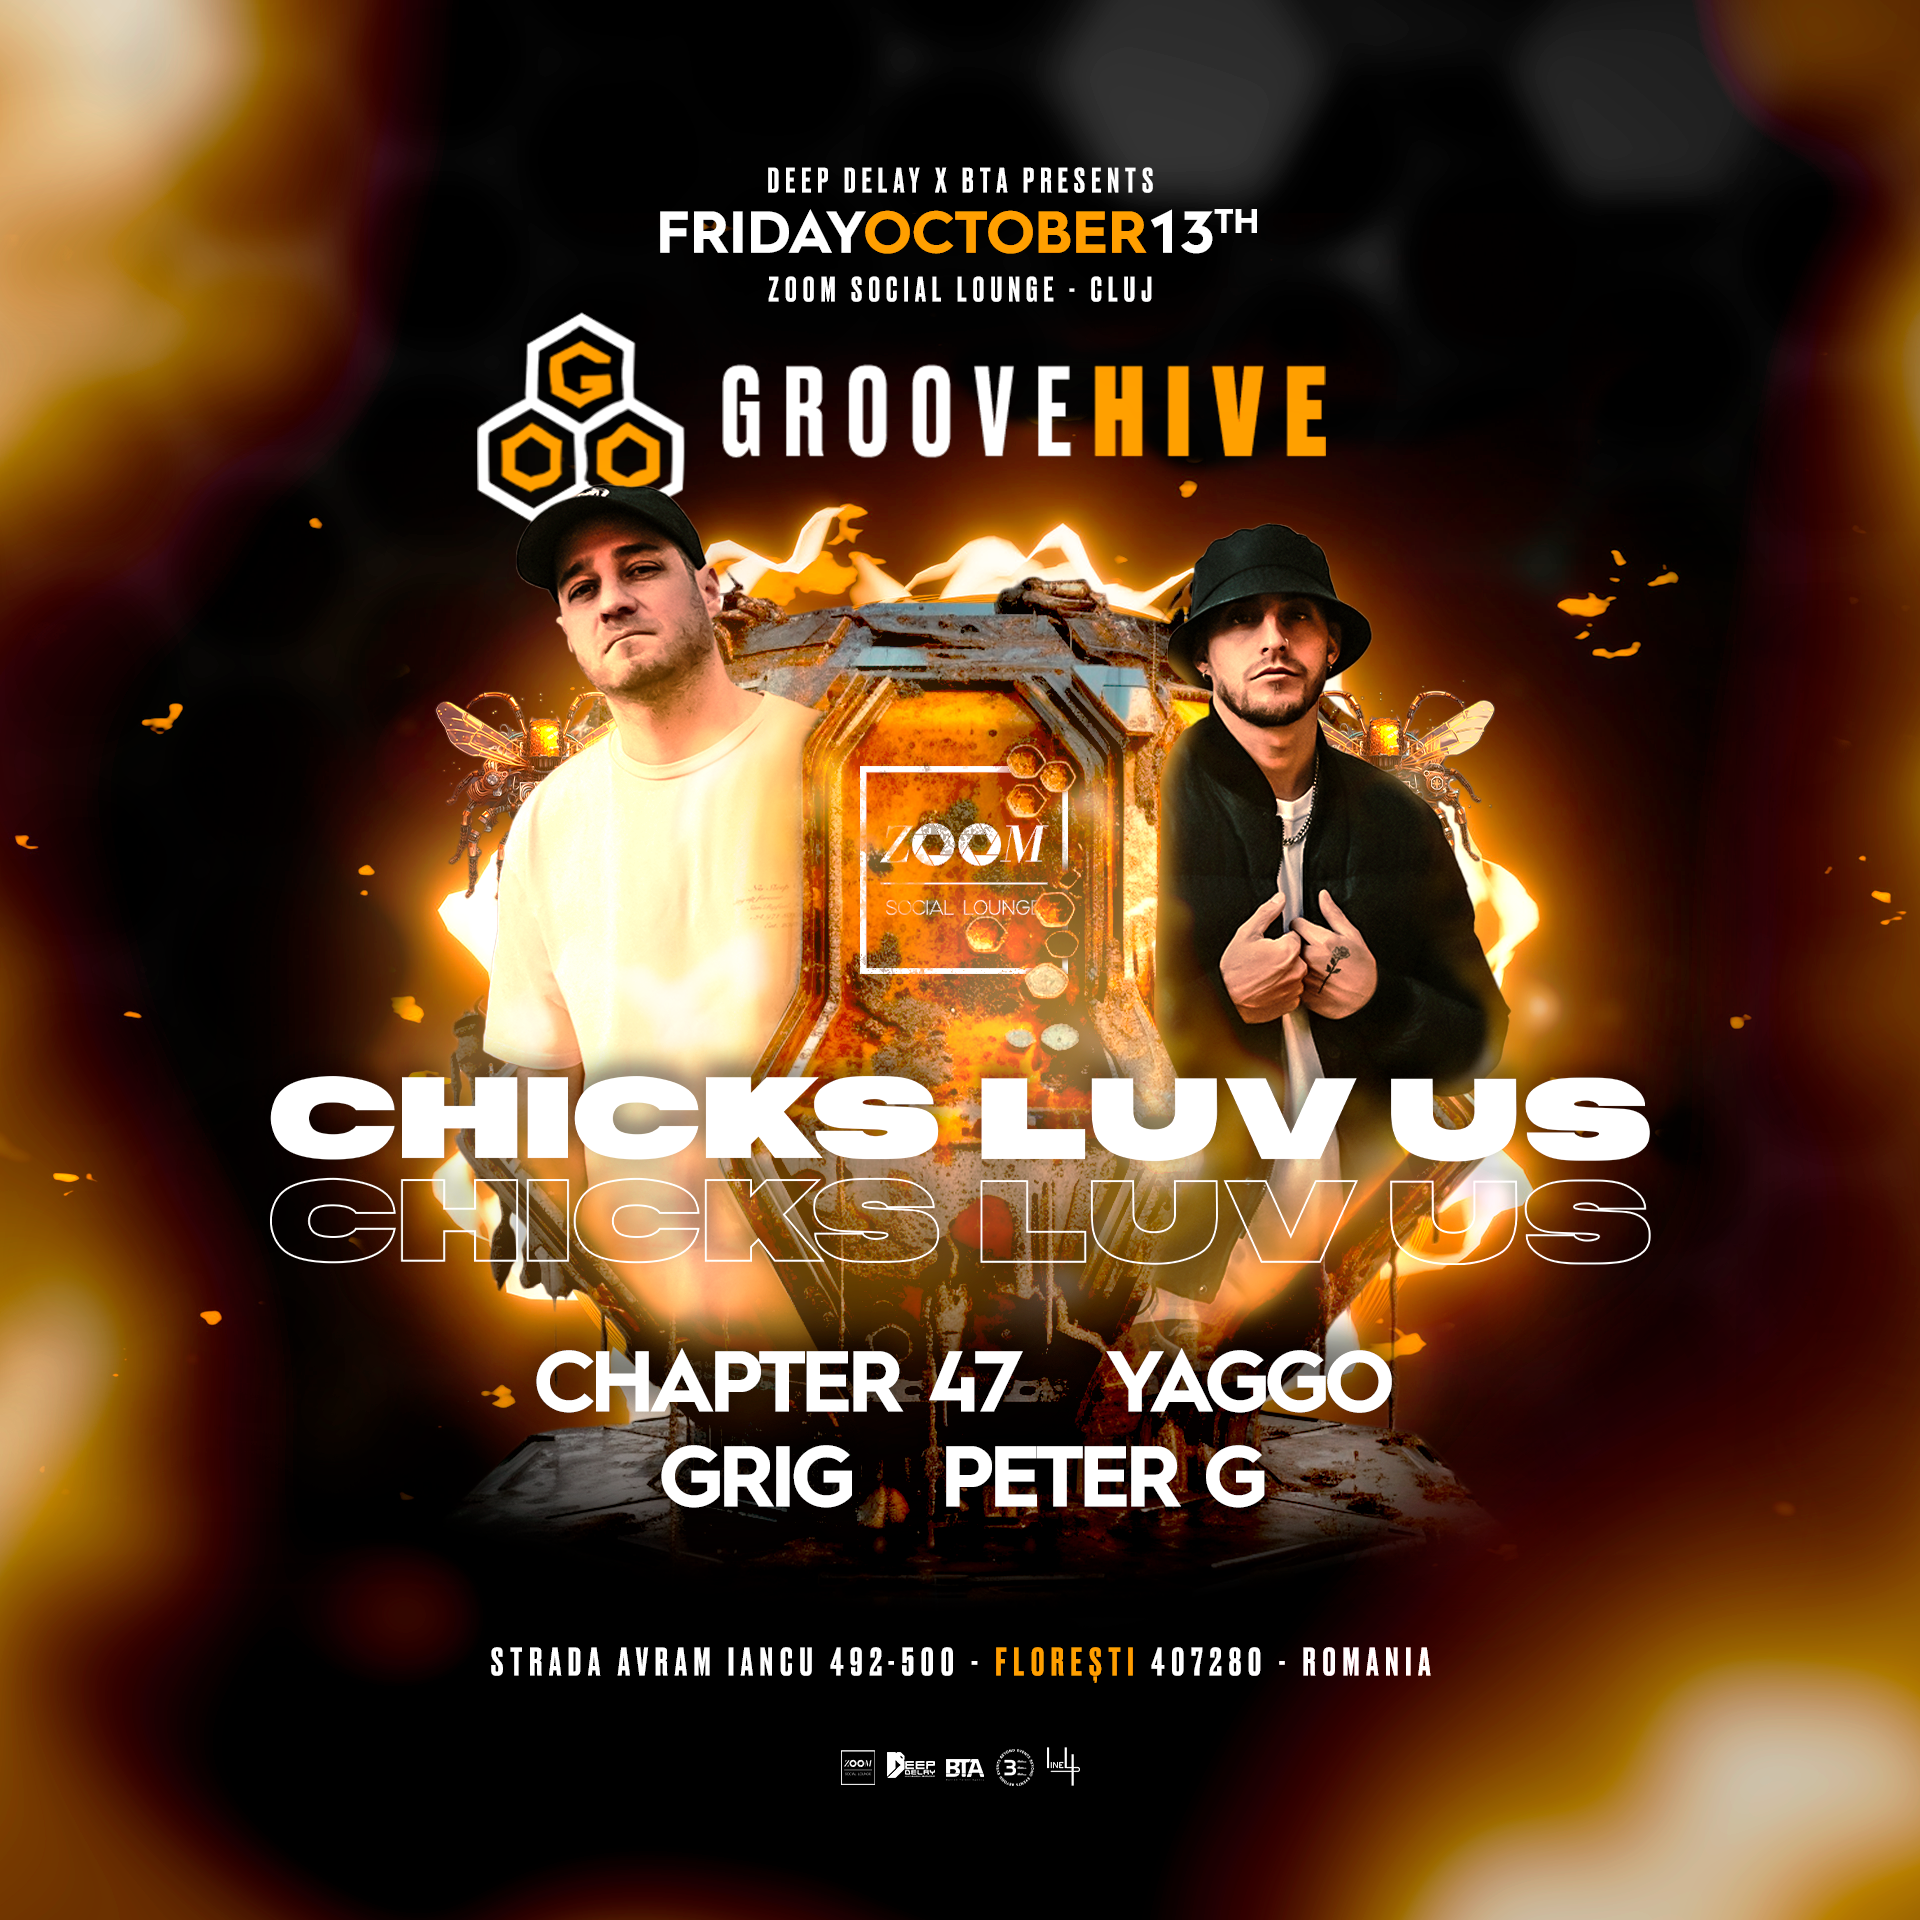 GROOVE HIVE EXPANDS TO LAS VEGAS AND HEADS TO CLUJ WITH MORE CITIES TO FOLLOW!